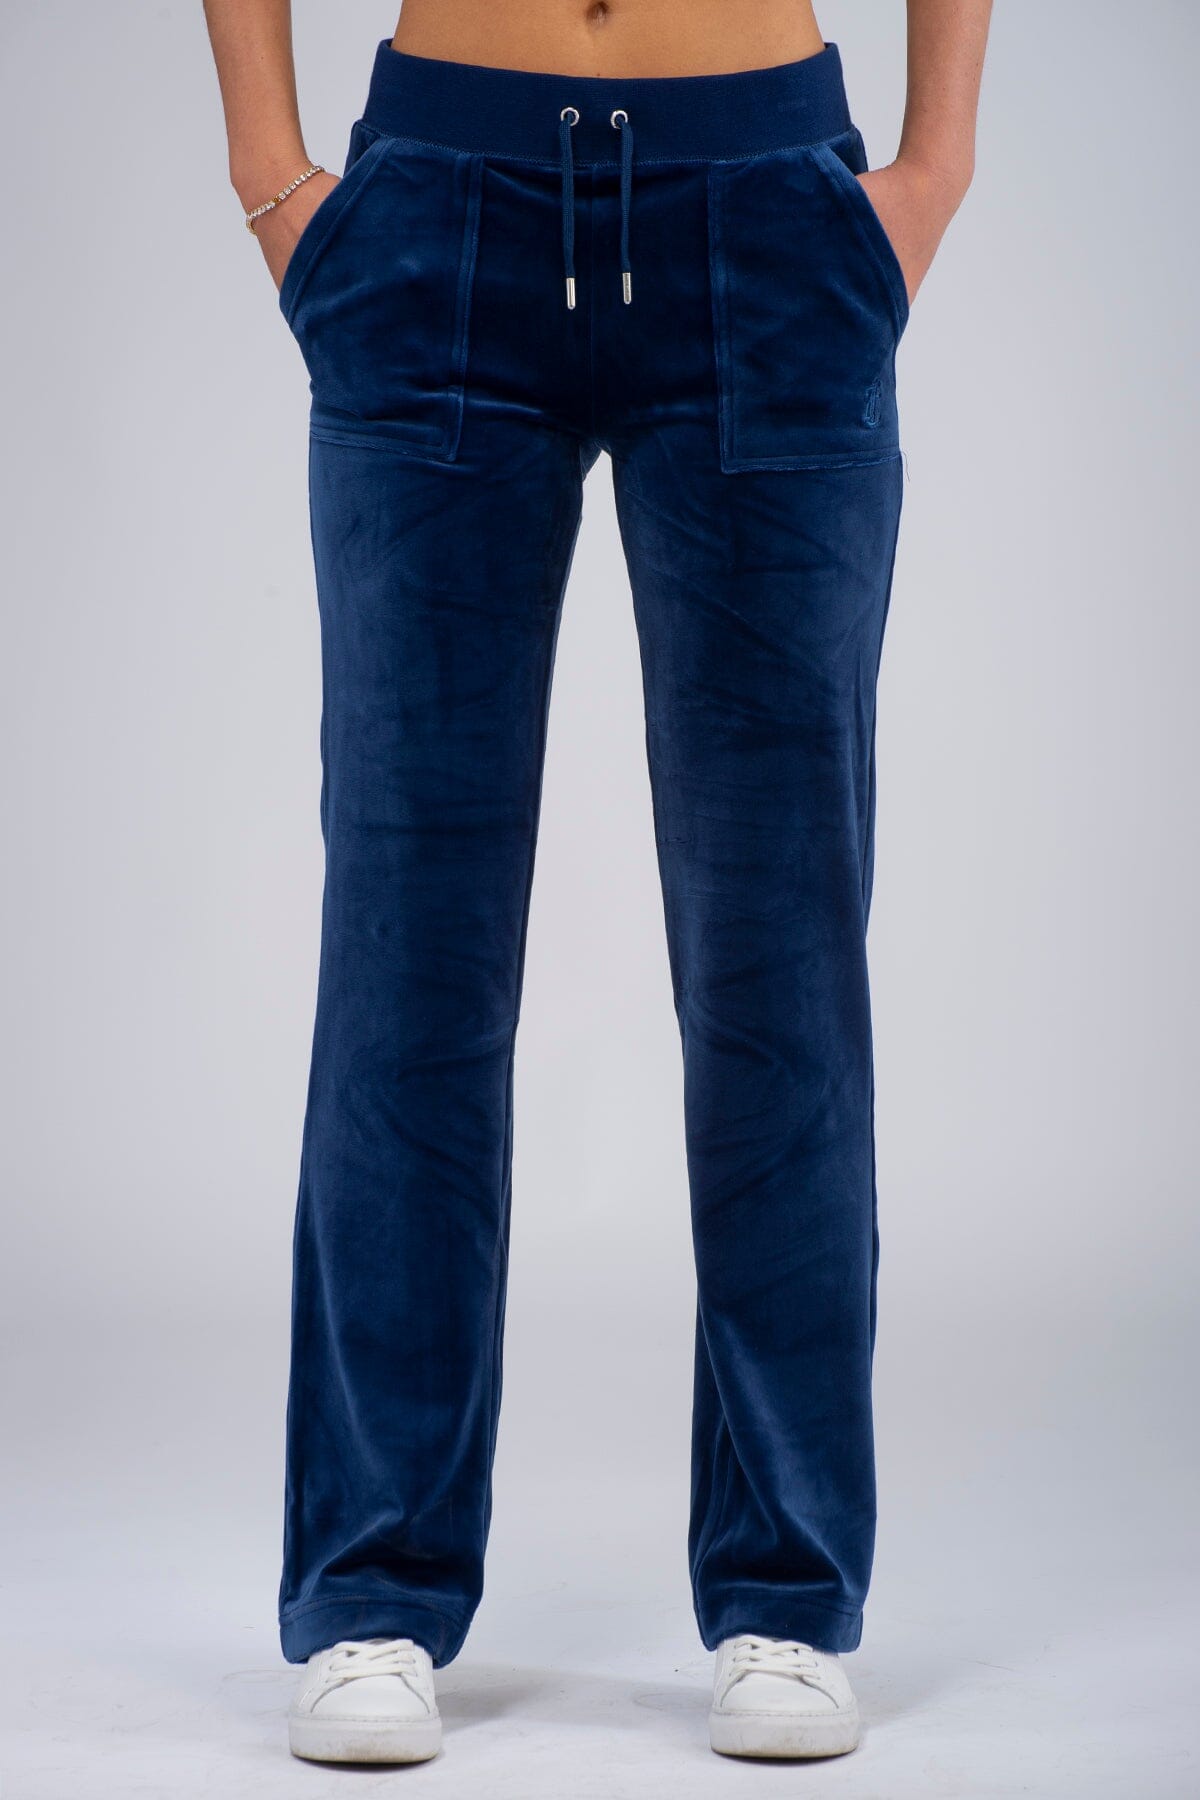 Juicy Couture Del Ray Pocket Pant Blue Depths Bukse